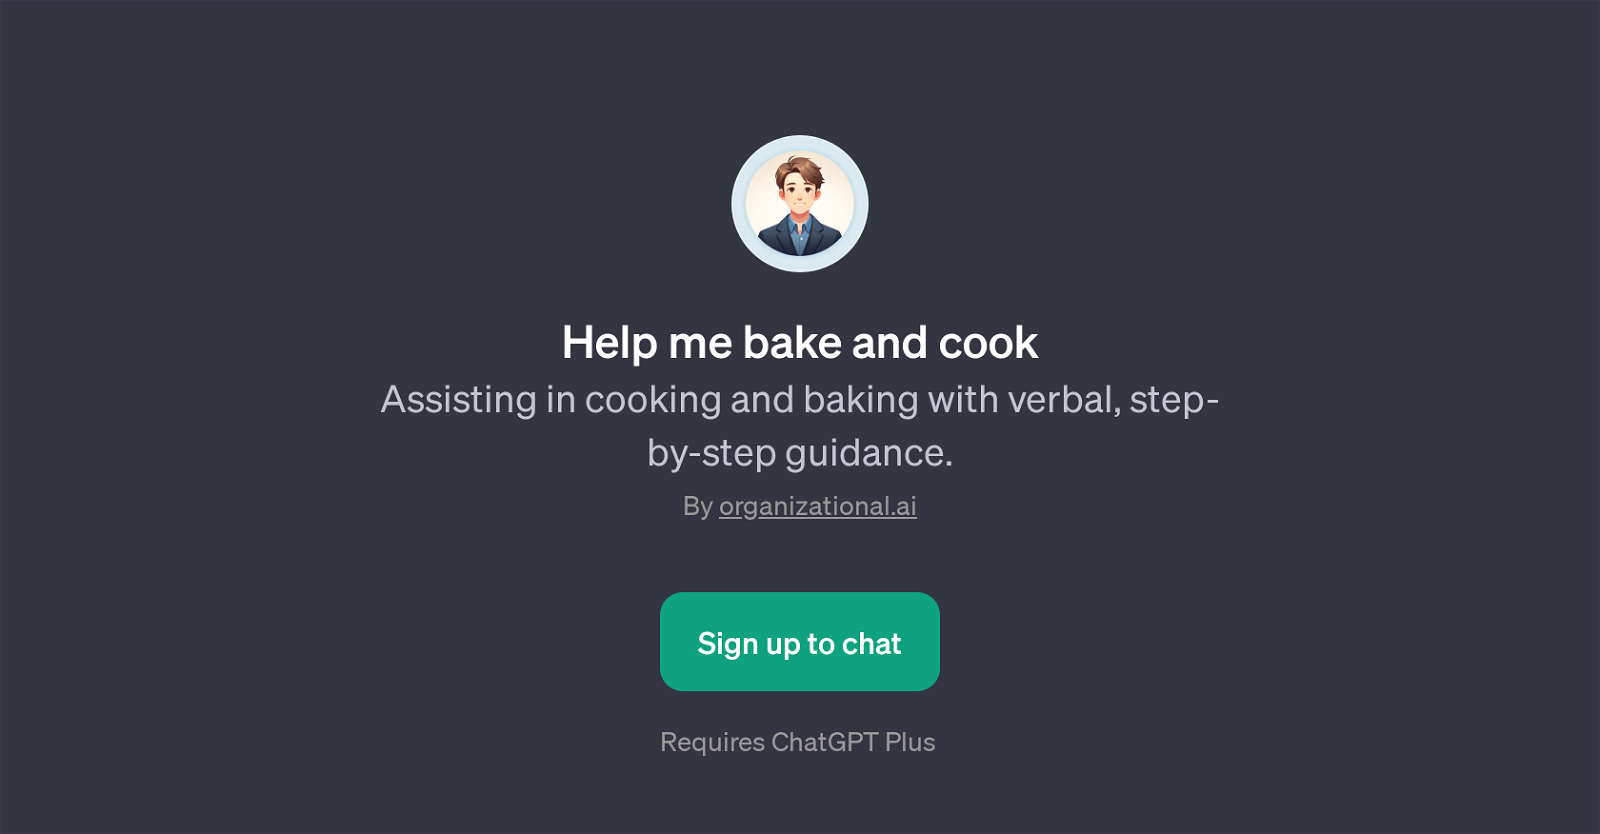 Help me bake and cook website